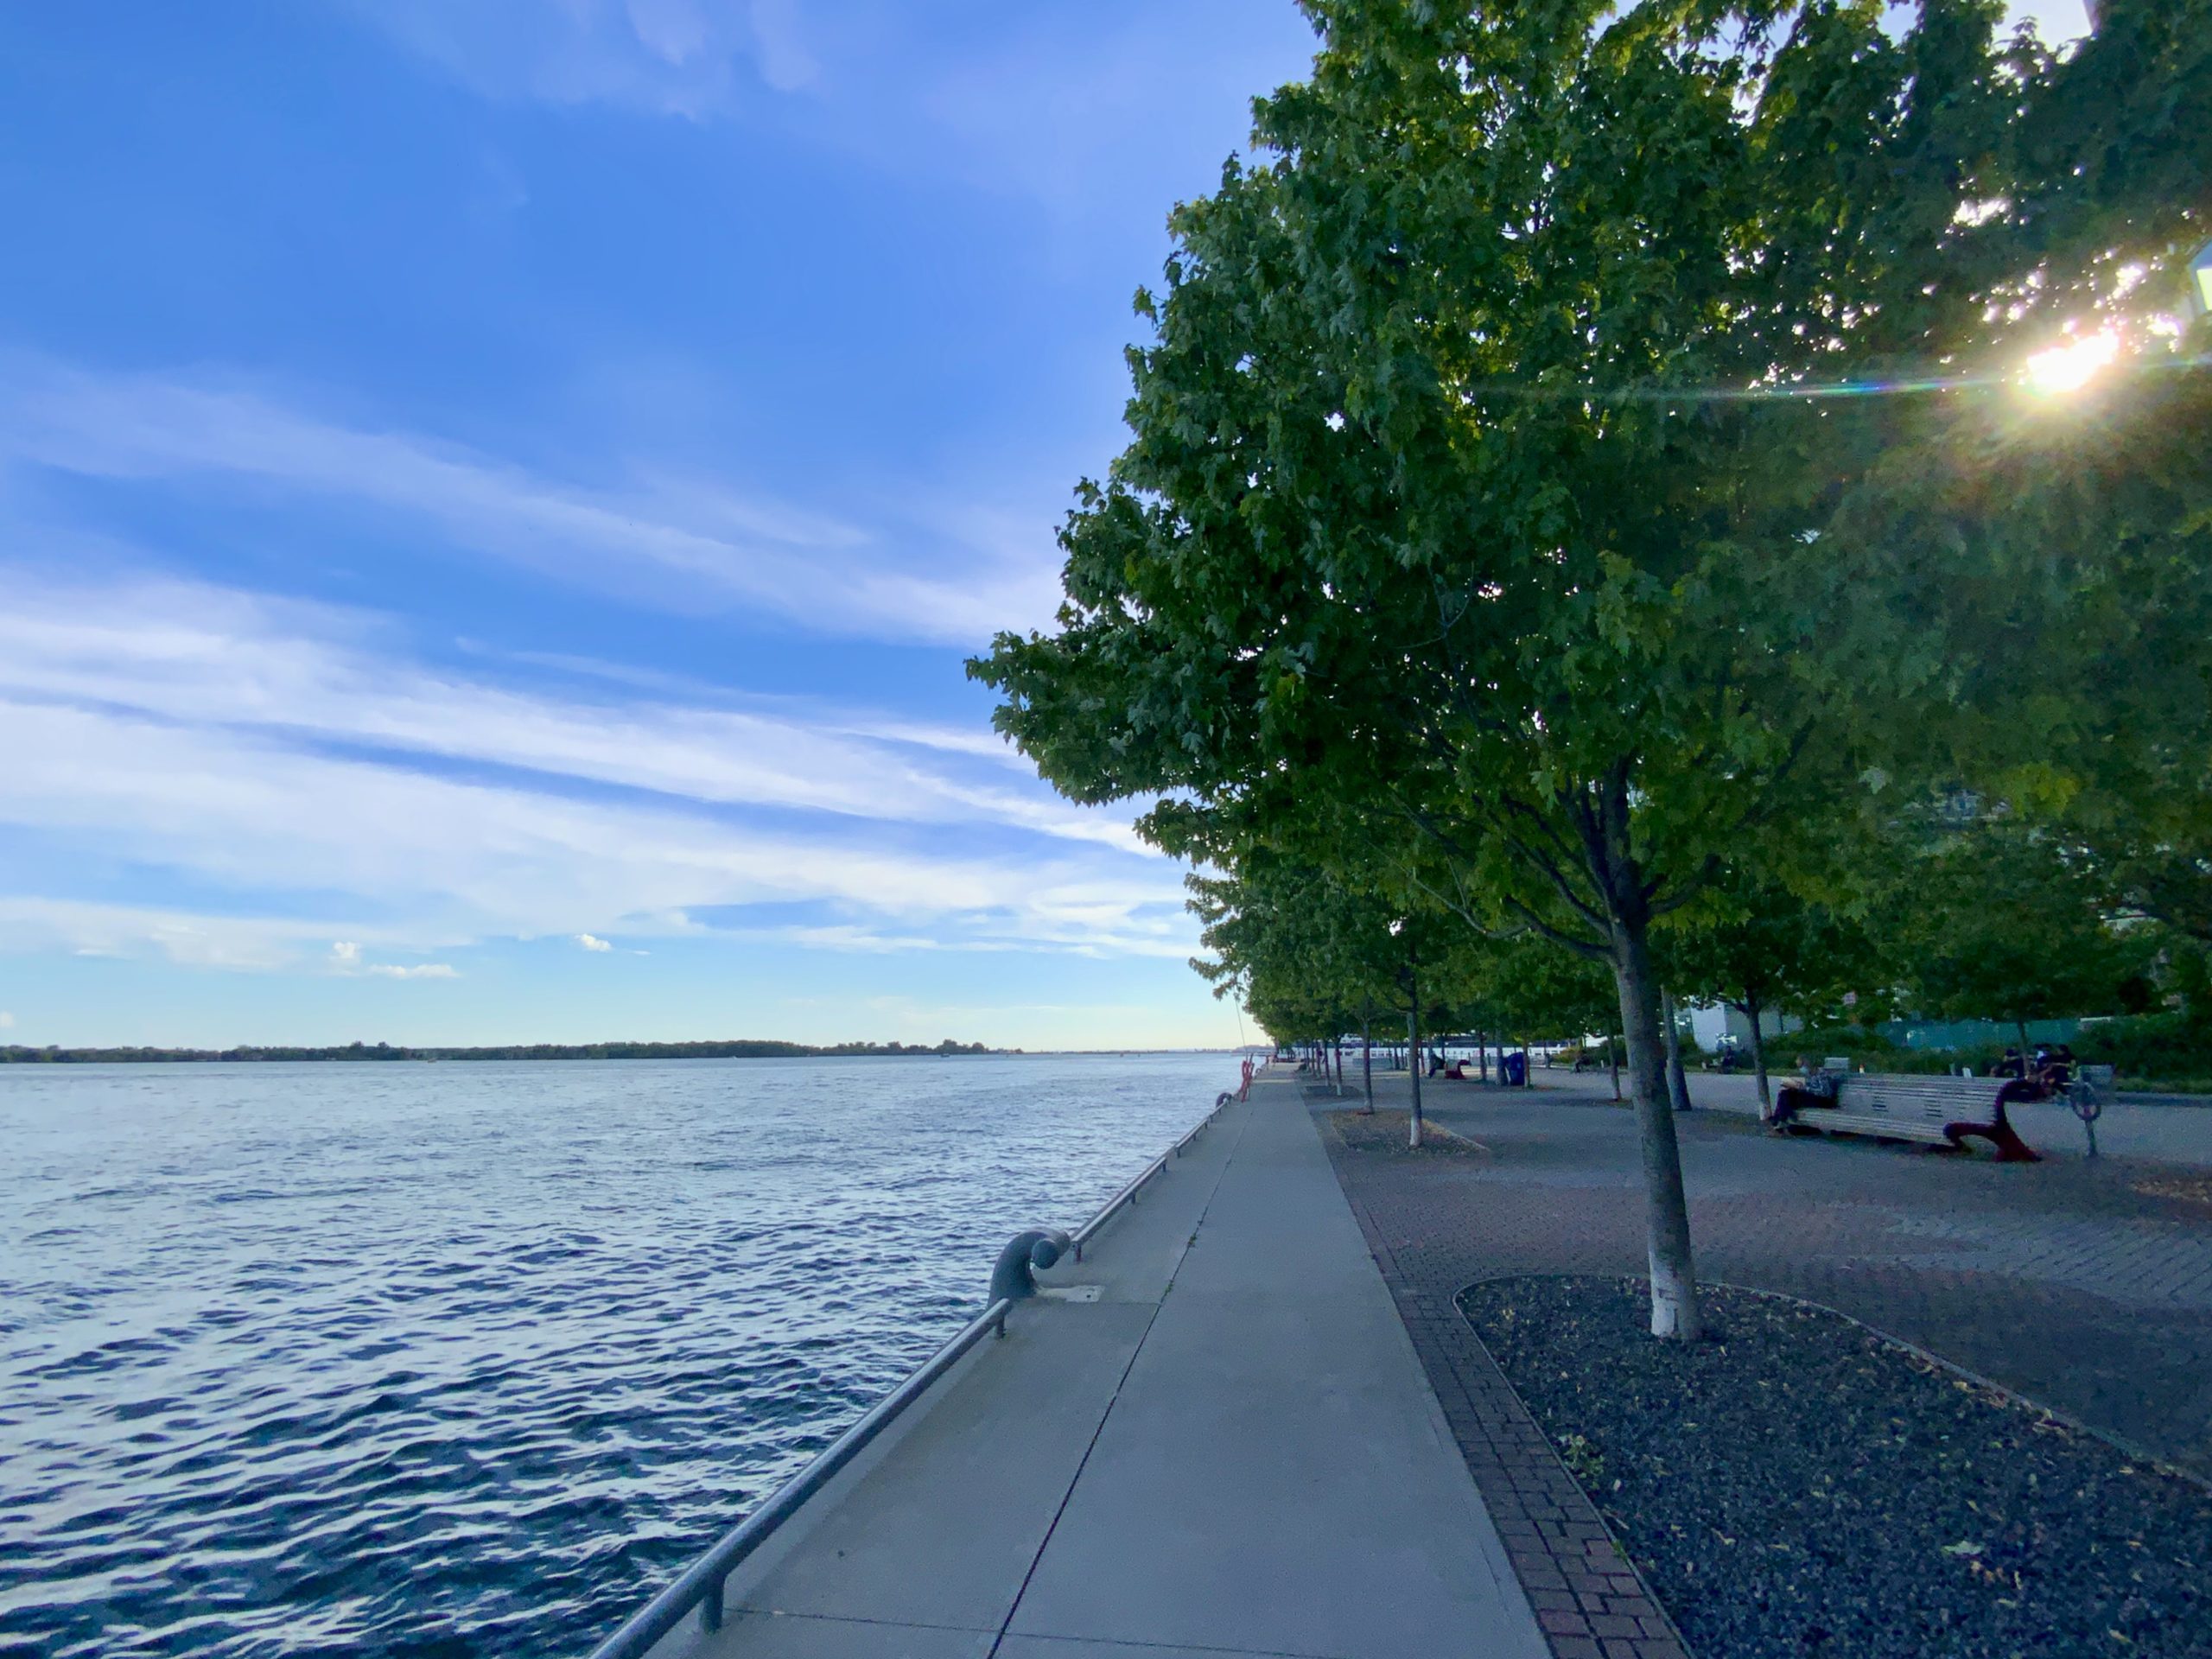 Toronto Waterfront with trees and lake.